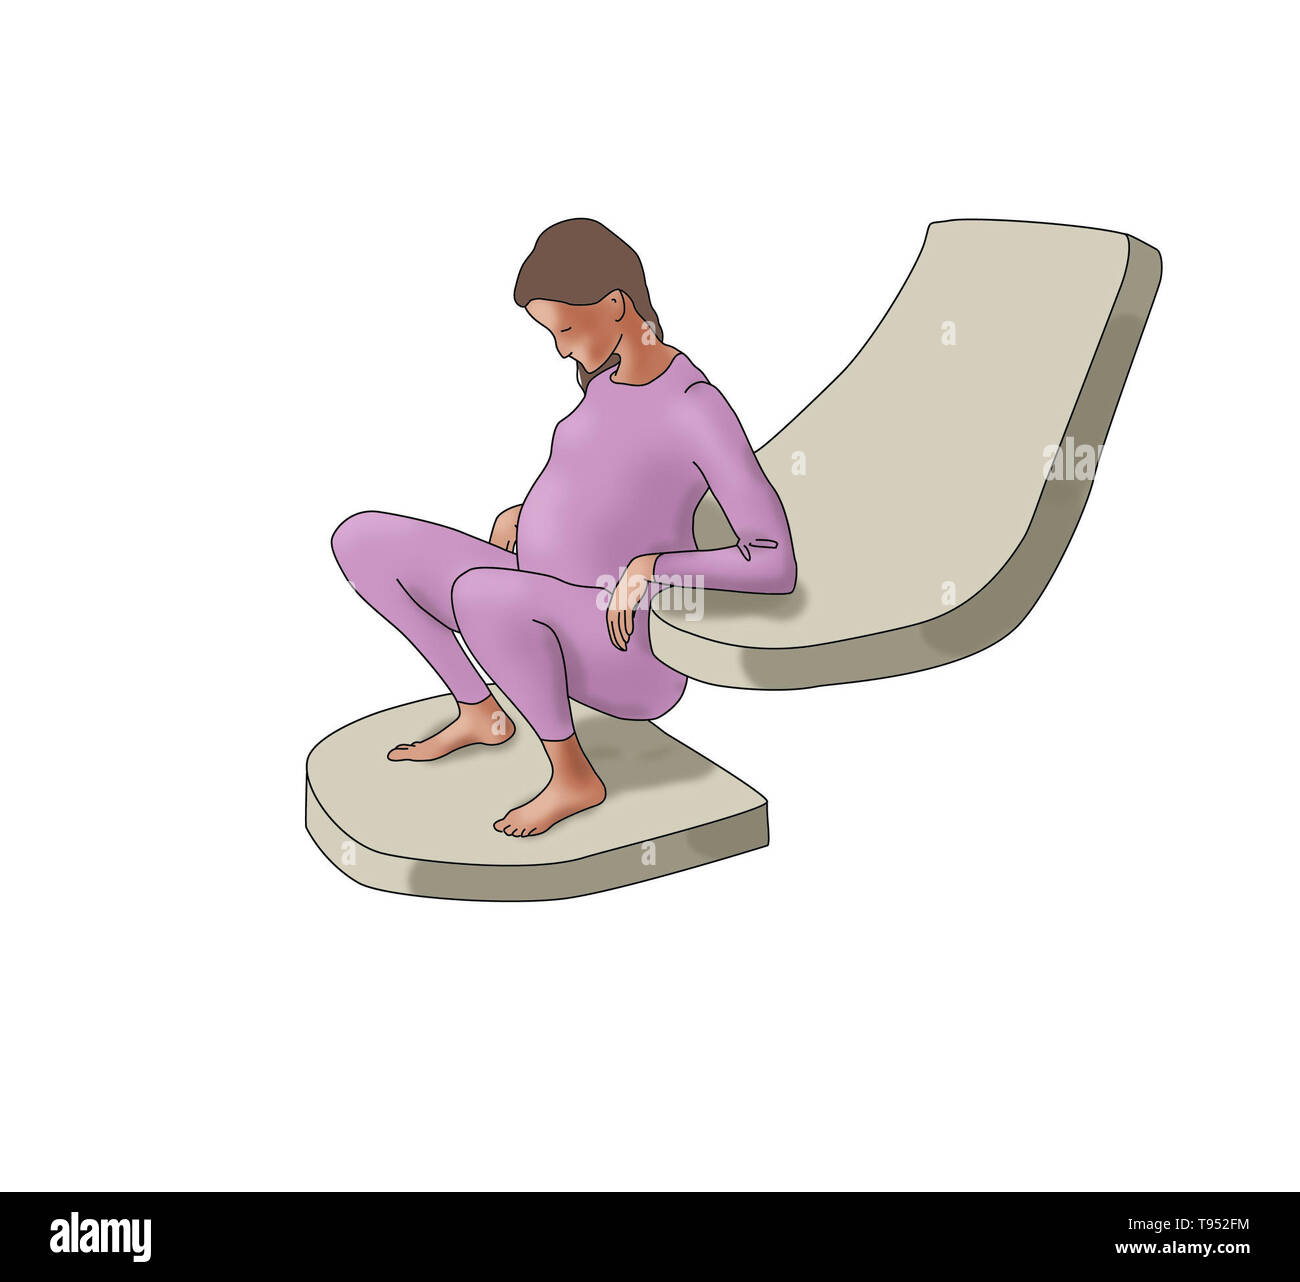 Illustration showing a woman in the Squatting birthing position. Stock Photo